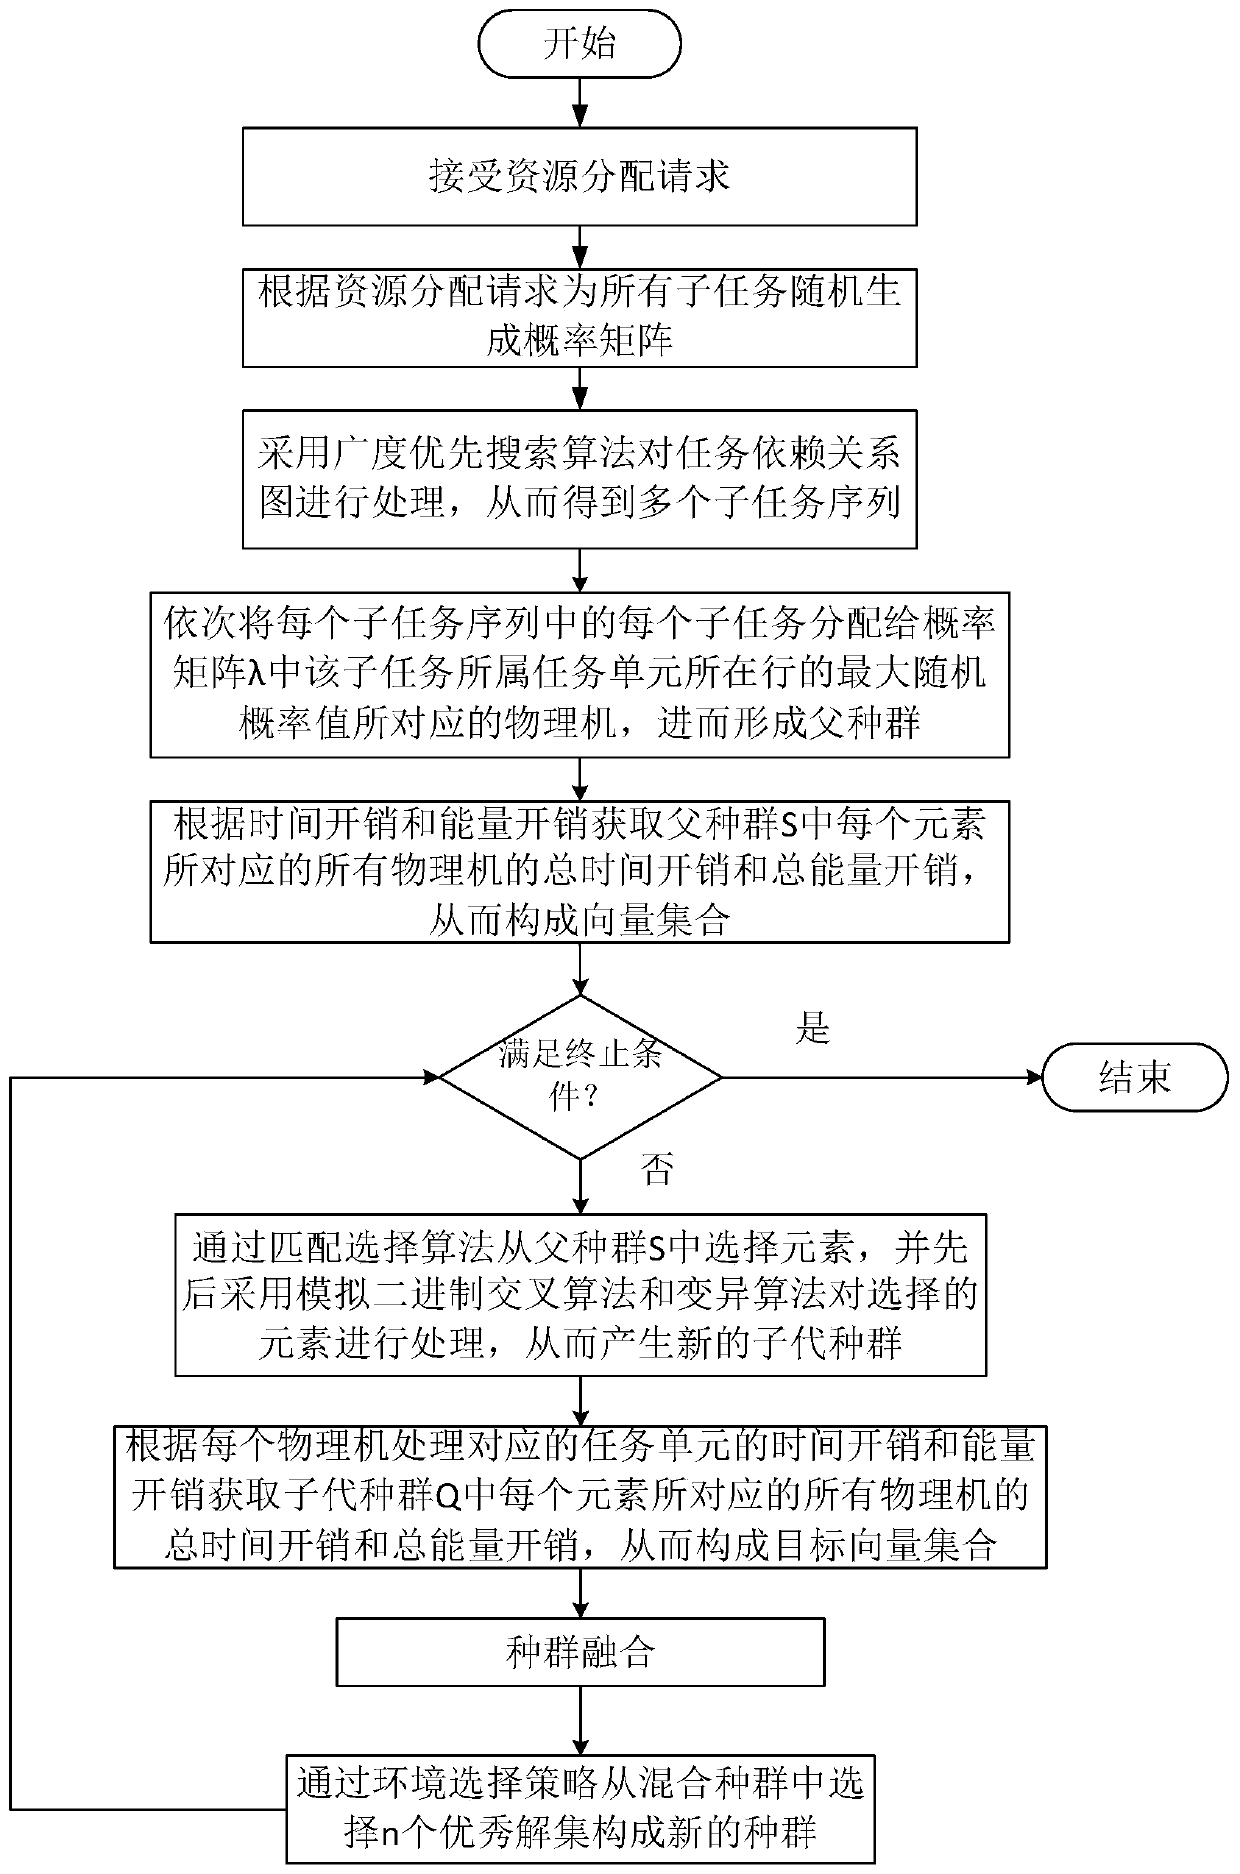 Cloud computing task scheduling method and system based on genetic algorithm